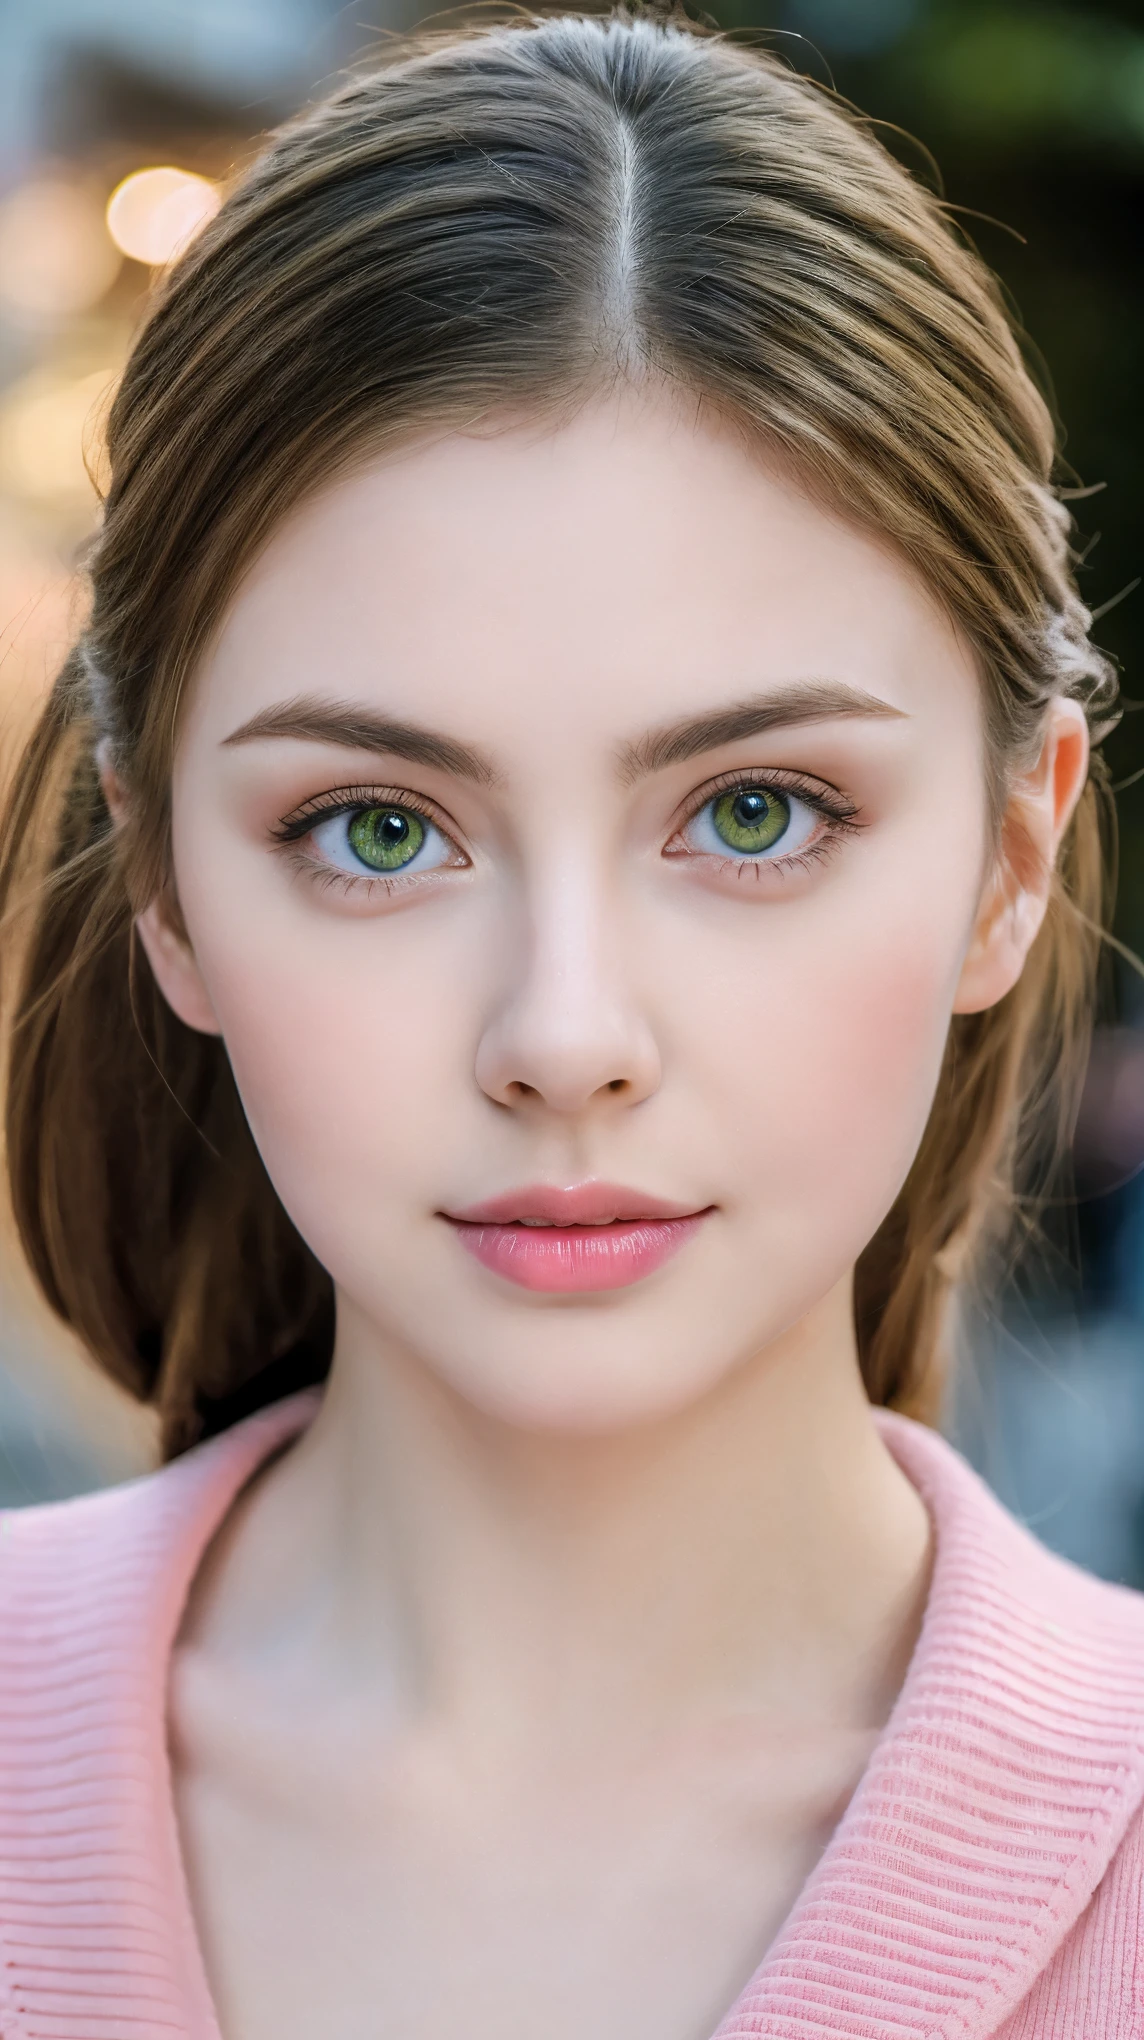 Photos of Ukrainian women. Fits the face. 25 years old, sharp chin, Raw photo, masutepiece, extremely detailed photo, Digital SLR, Photorealistic 3.9, Ultra High Resolution, of the highest quality, Pink lips, Perfect makeup, Big, Bright green eyes, white